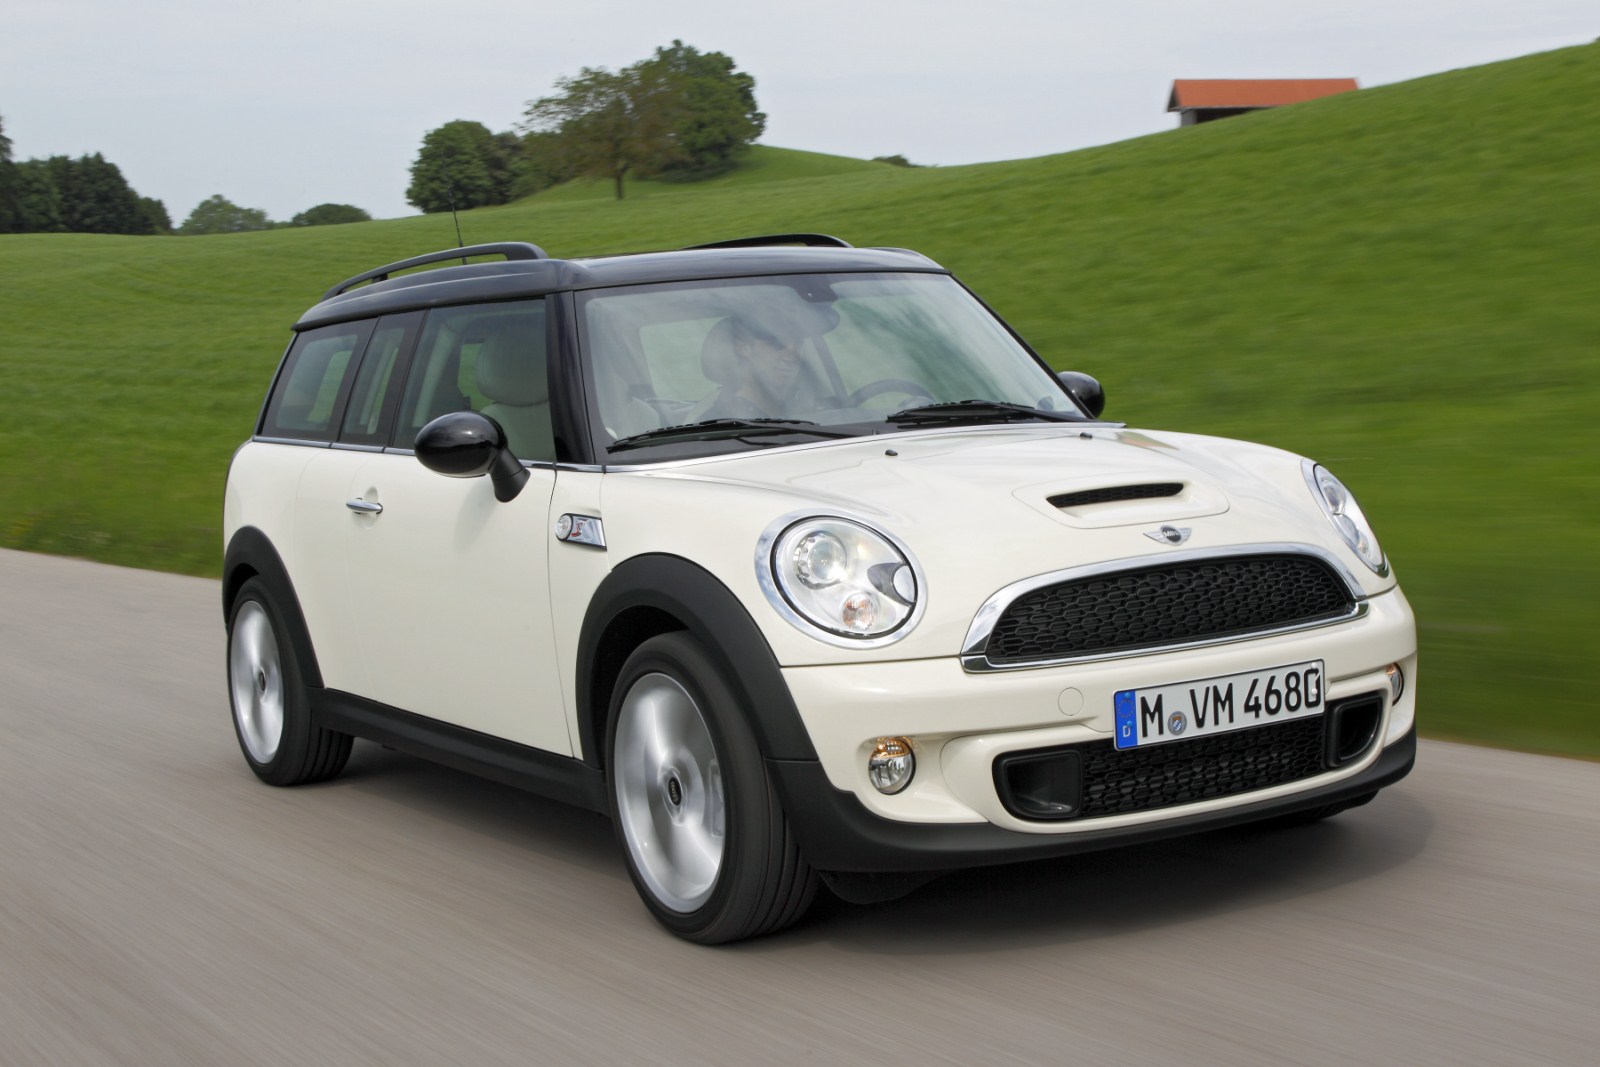 Just the facts: The facelifted MINI family